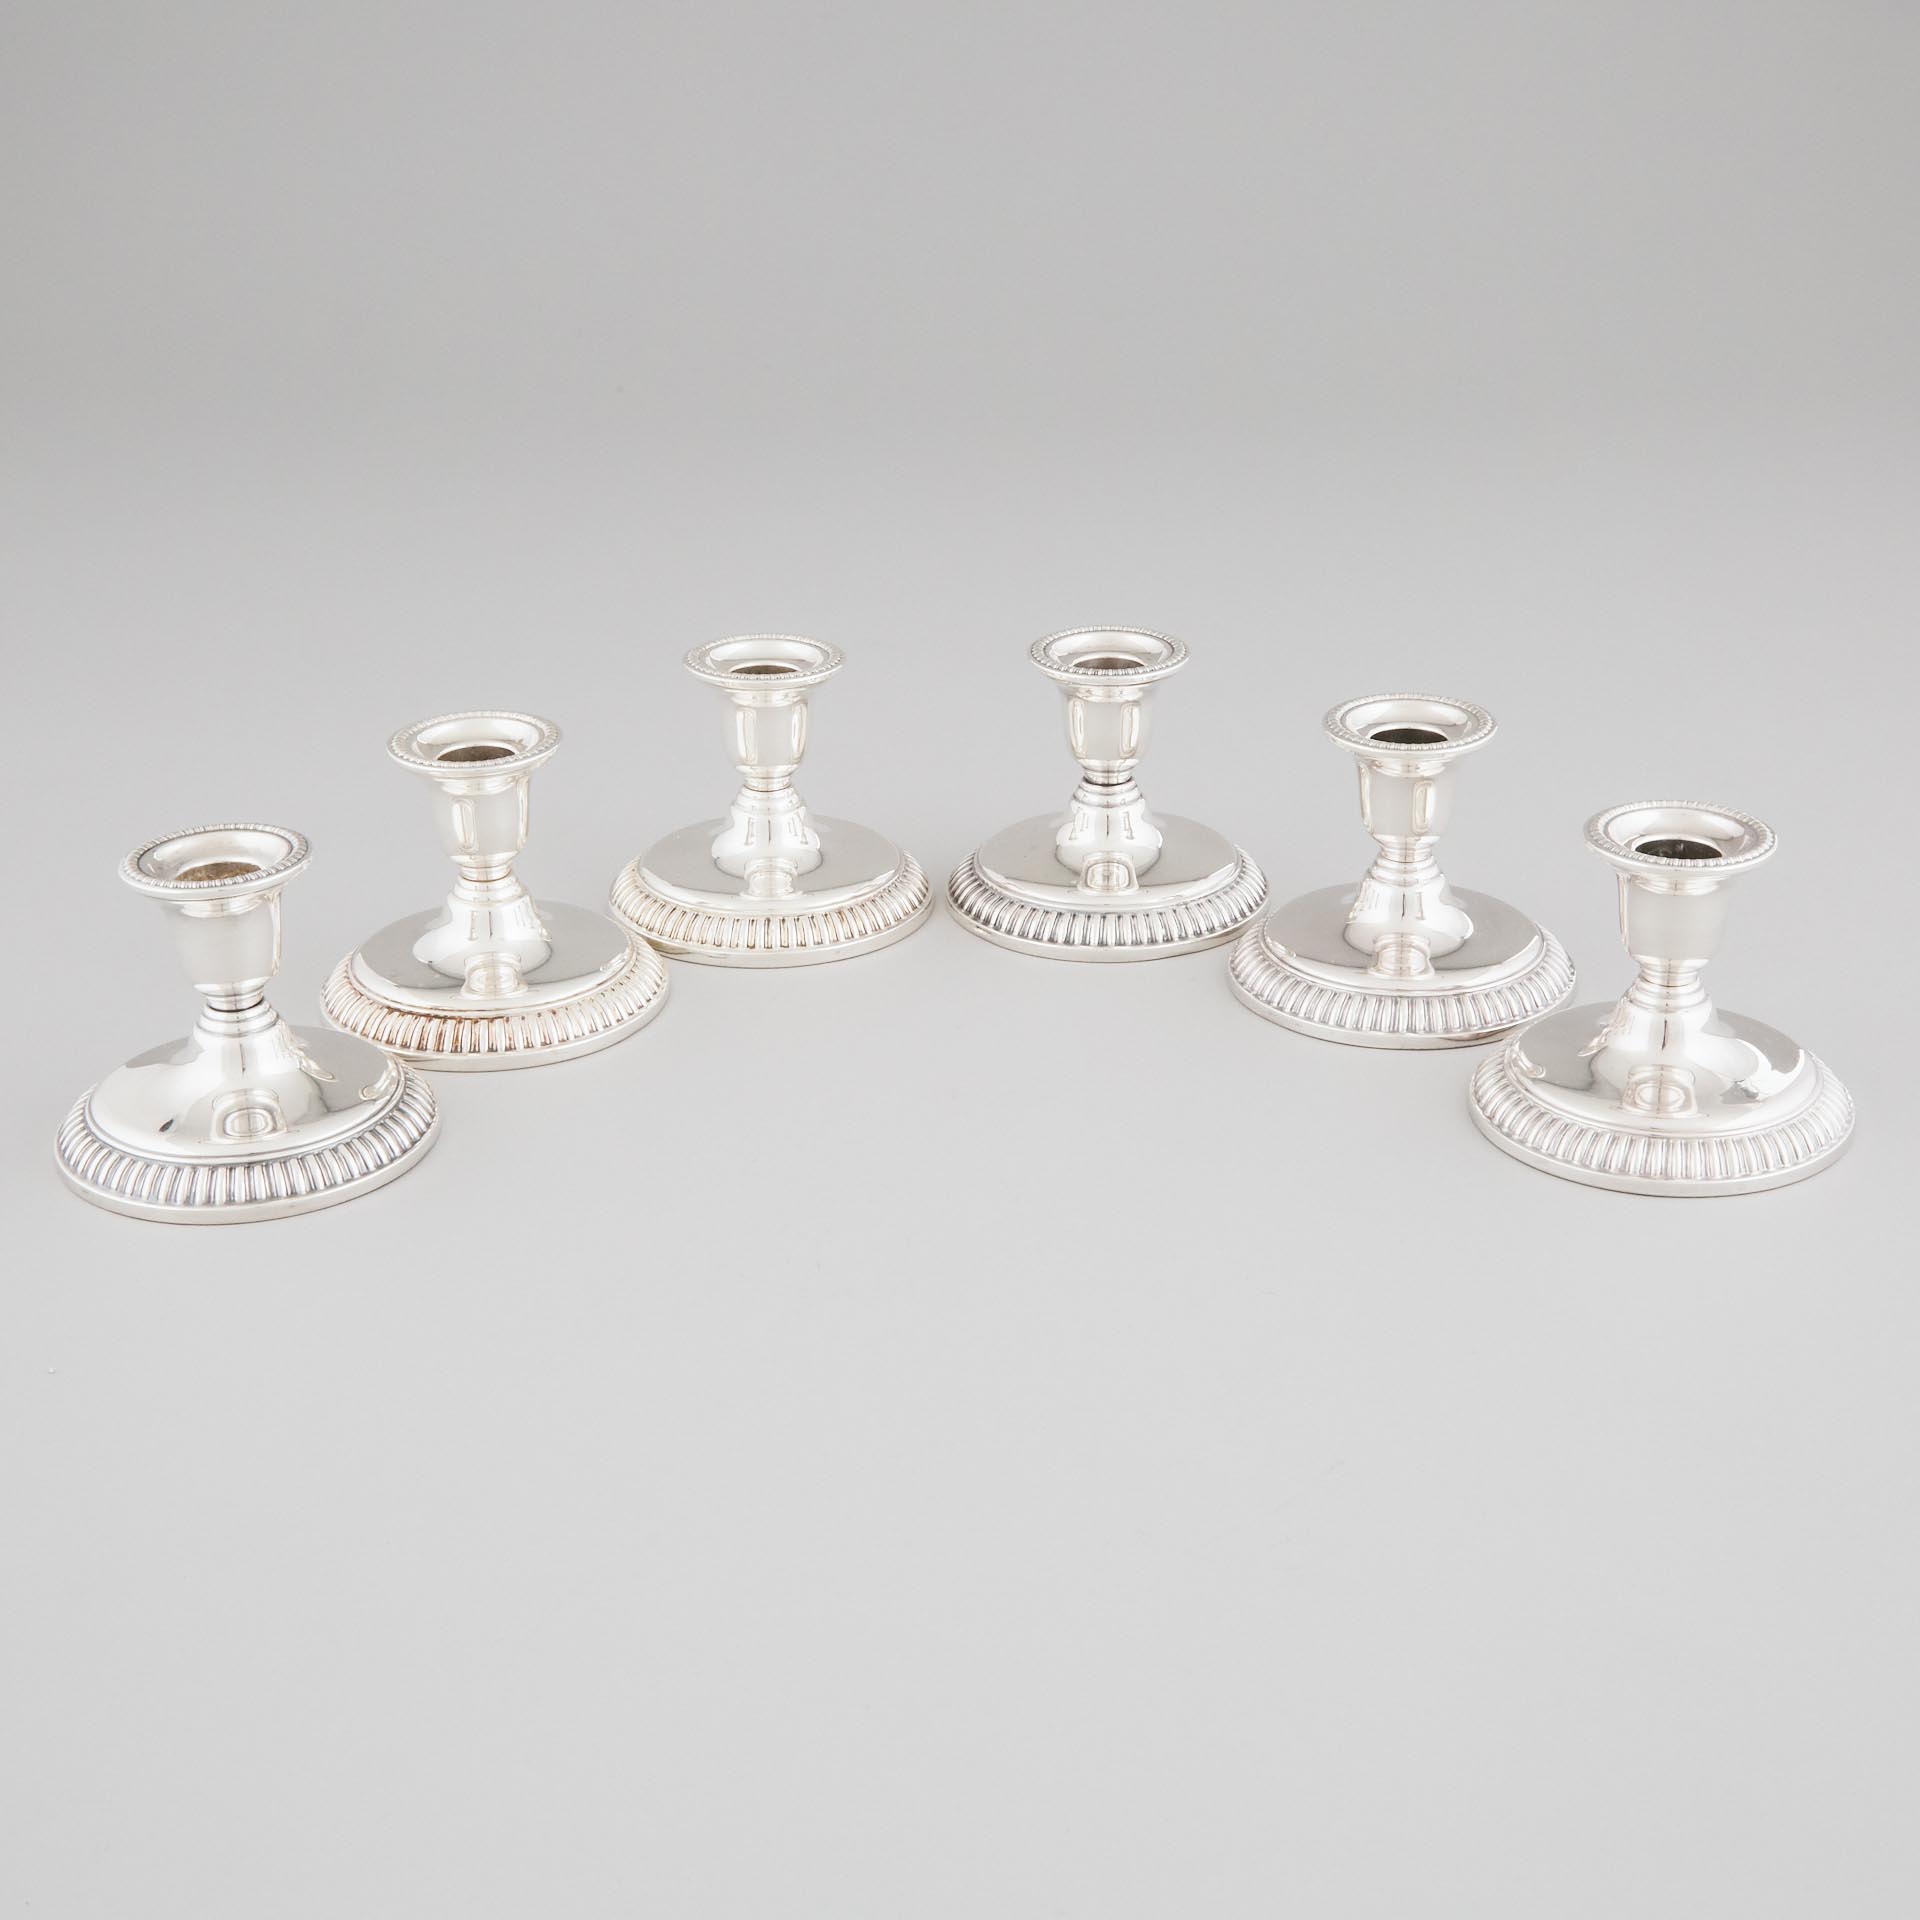 Six Canadian Silver Low Candlesticks  3ac08d